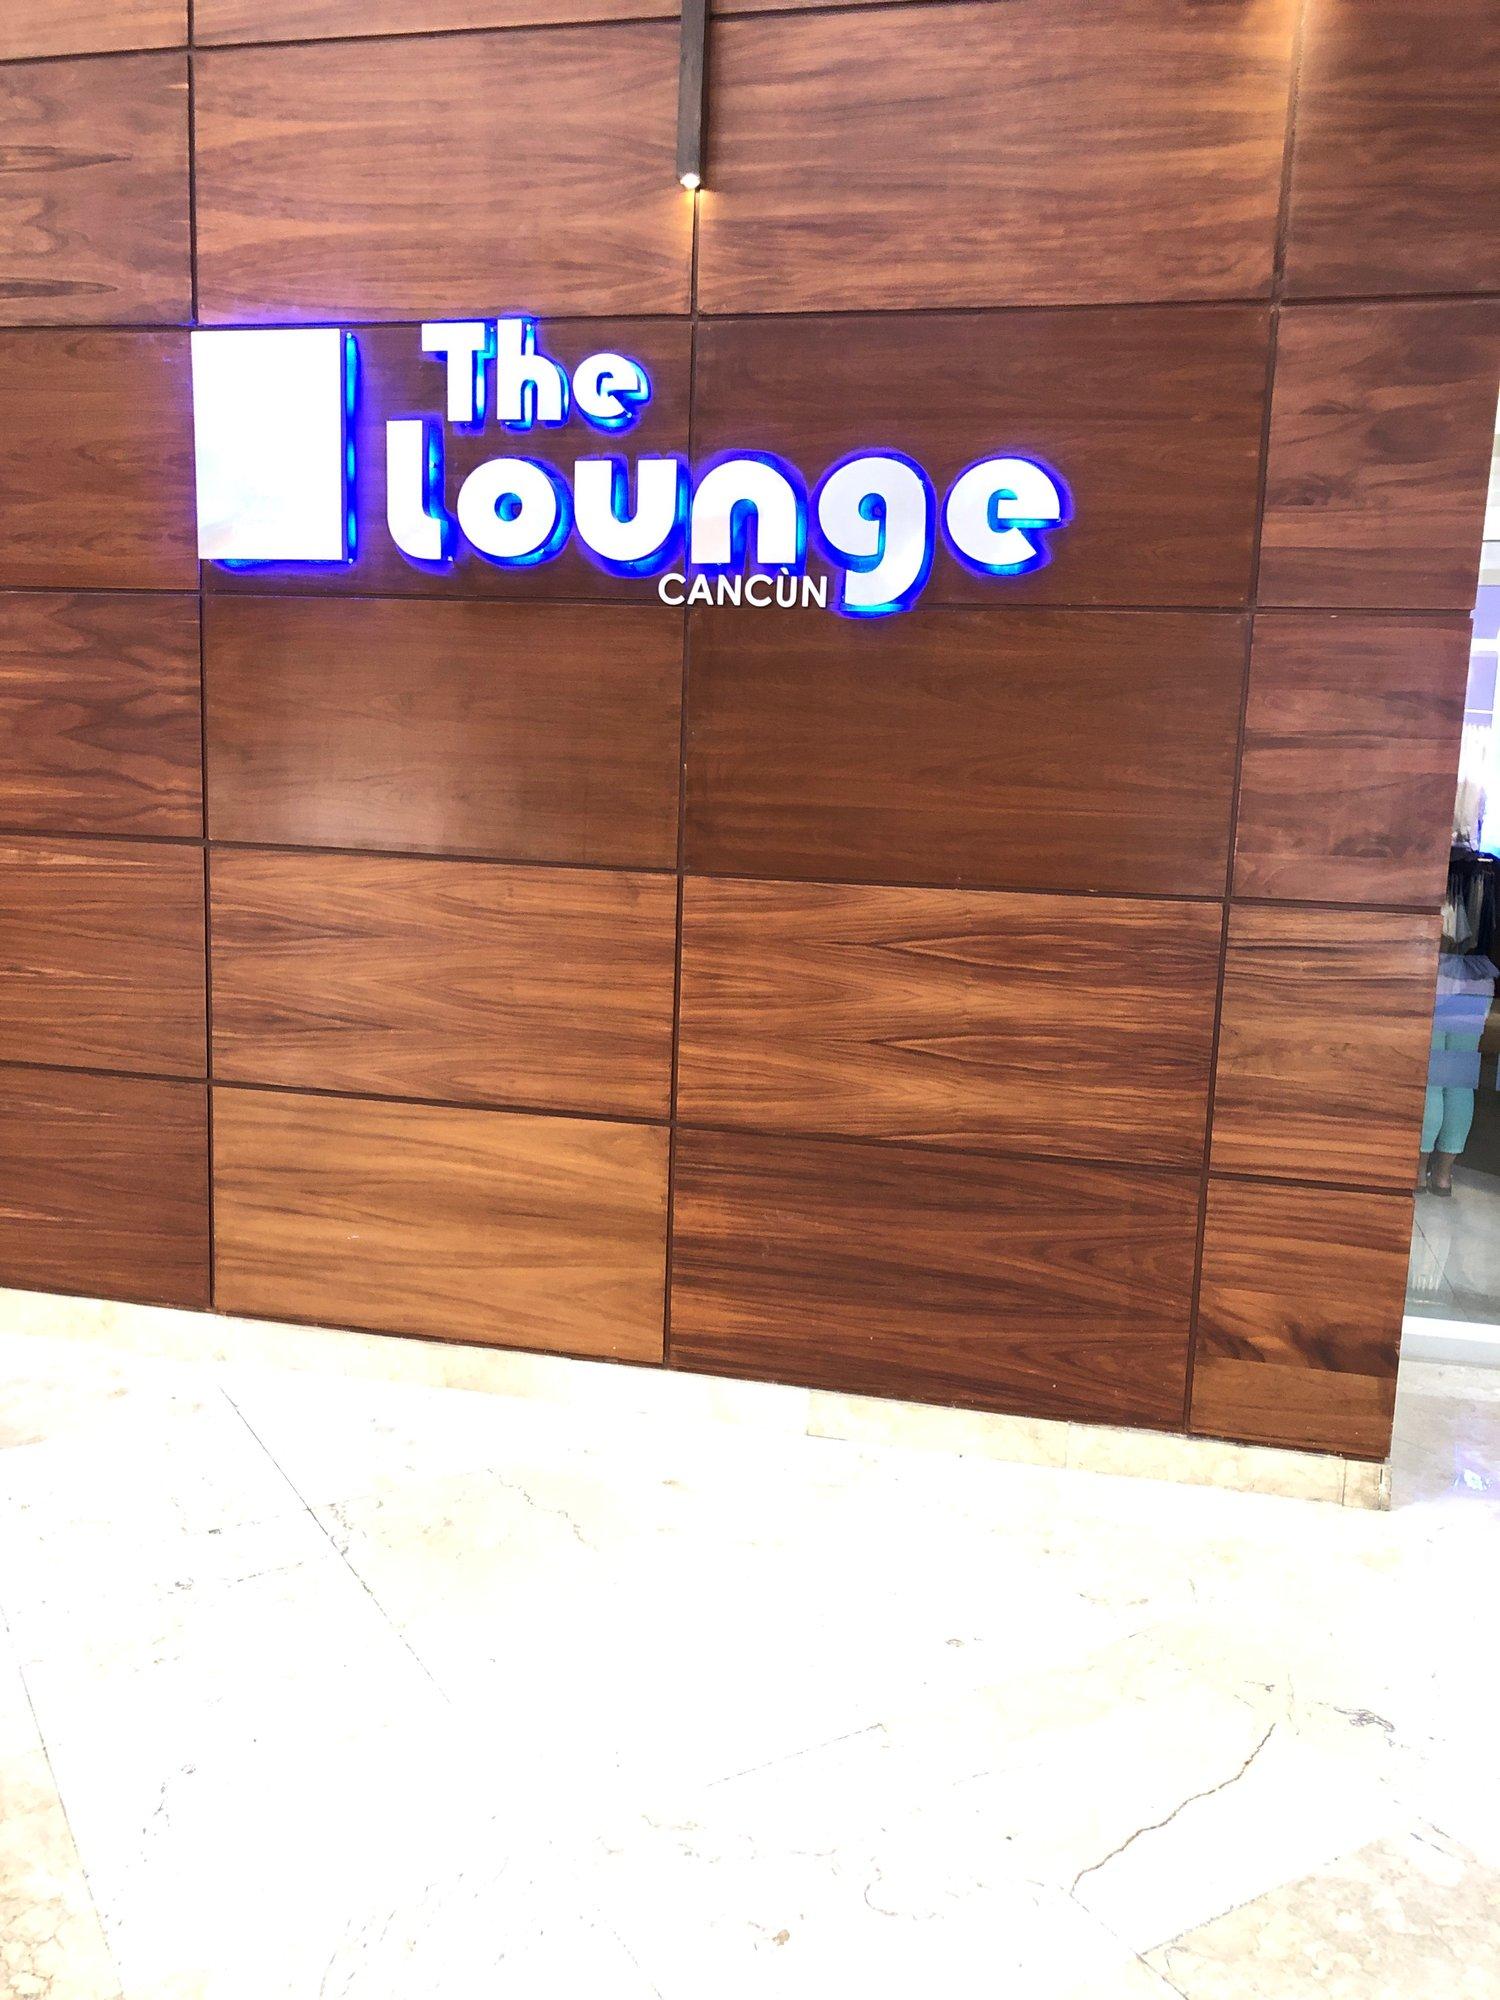 The Lounge by Global Lounge Network image 2 of 2